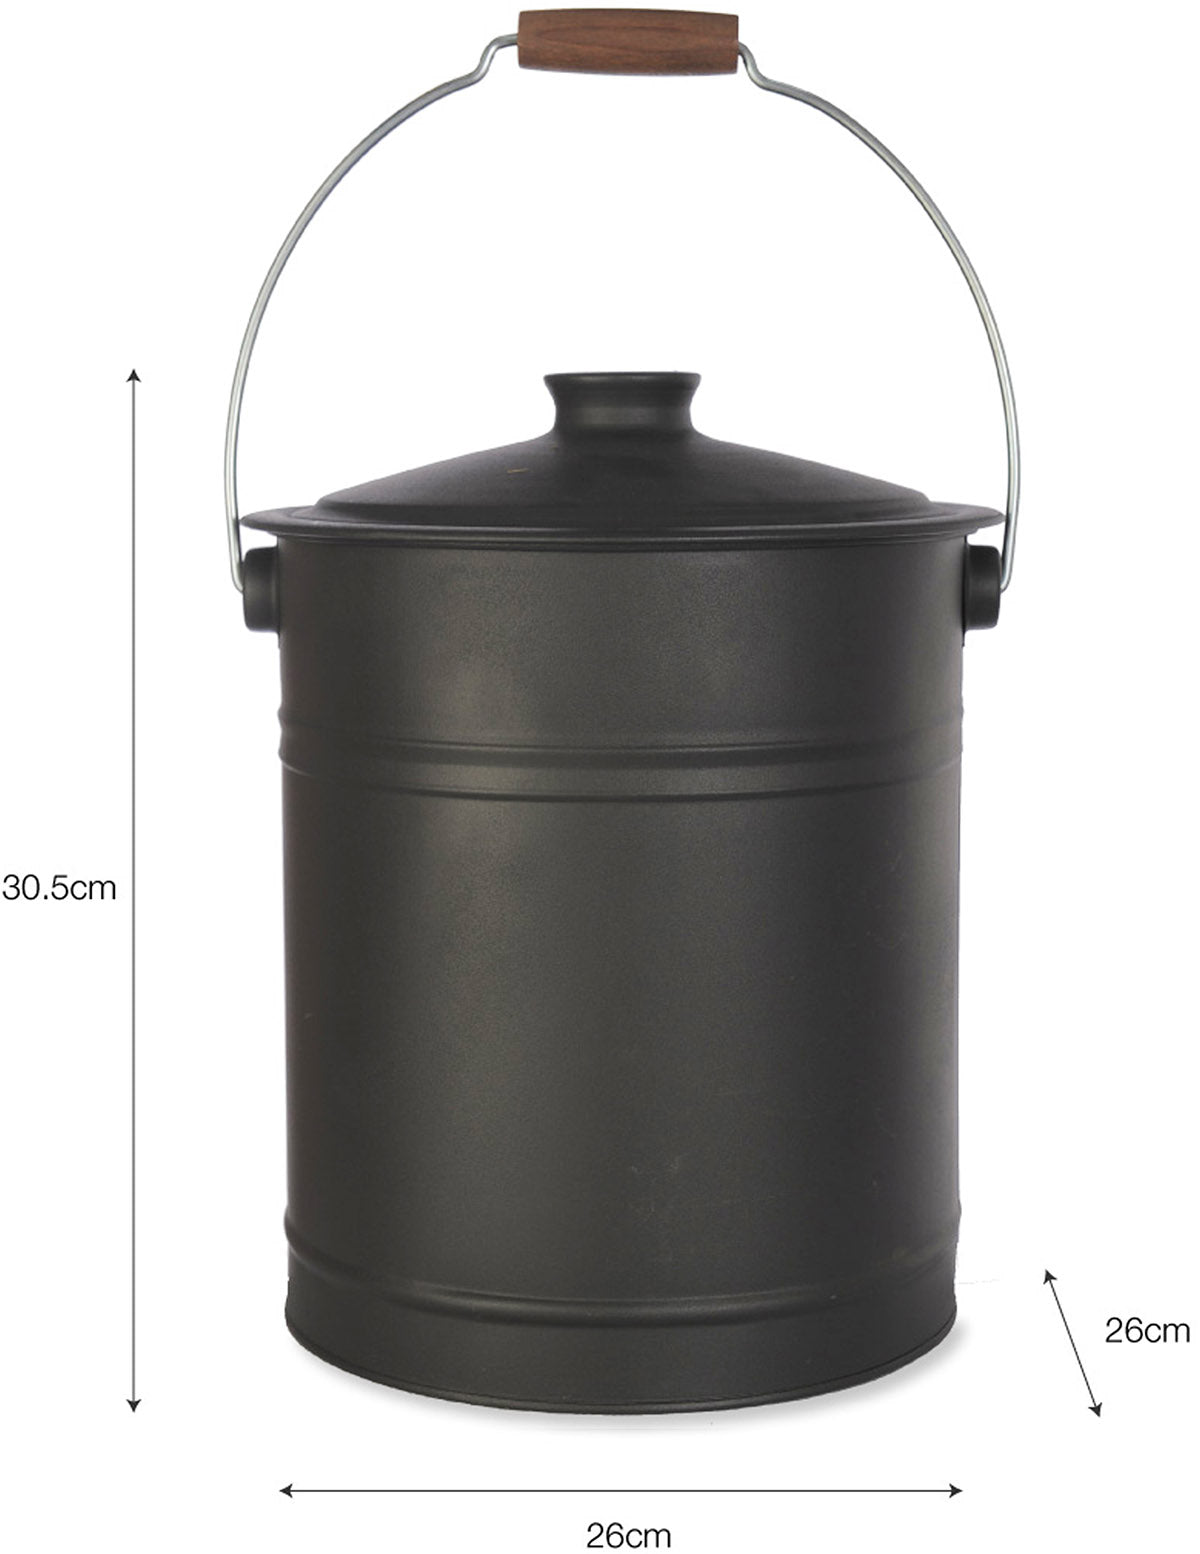 Garden Trading Forge Fire Bucket dimensions overview